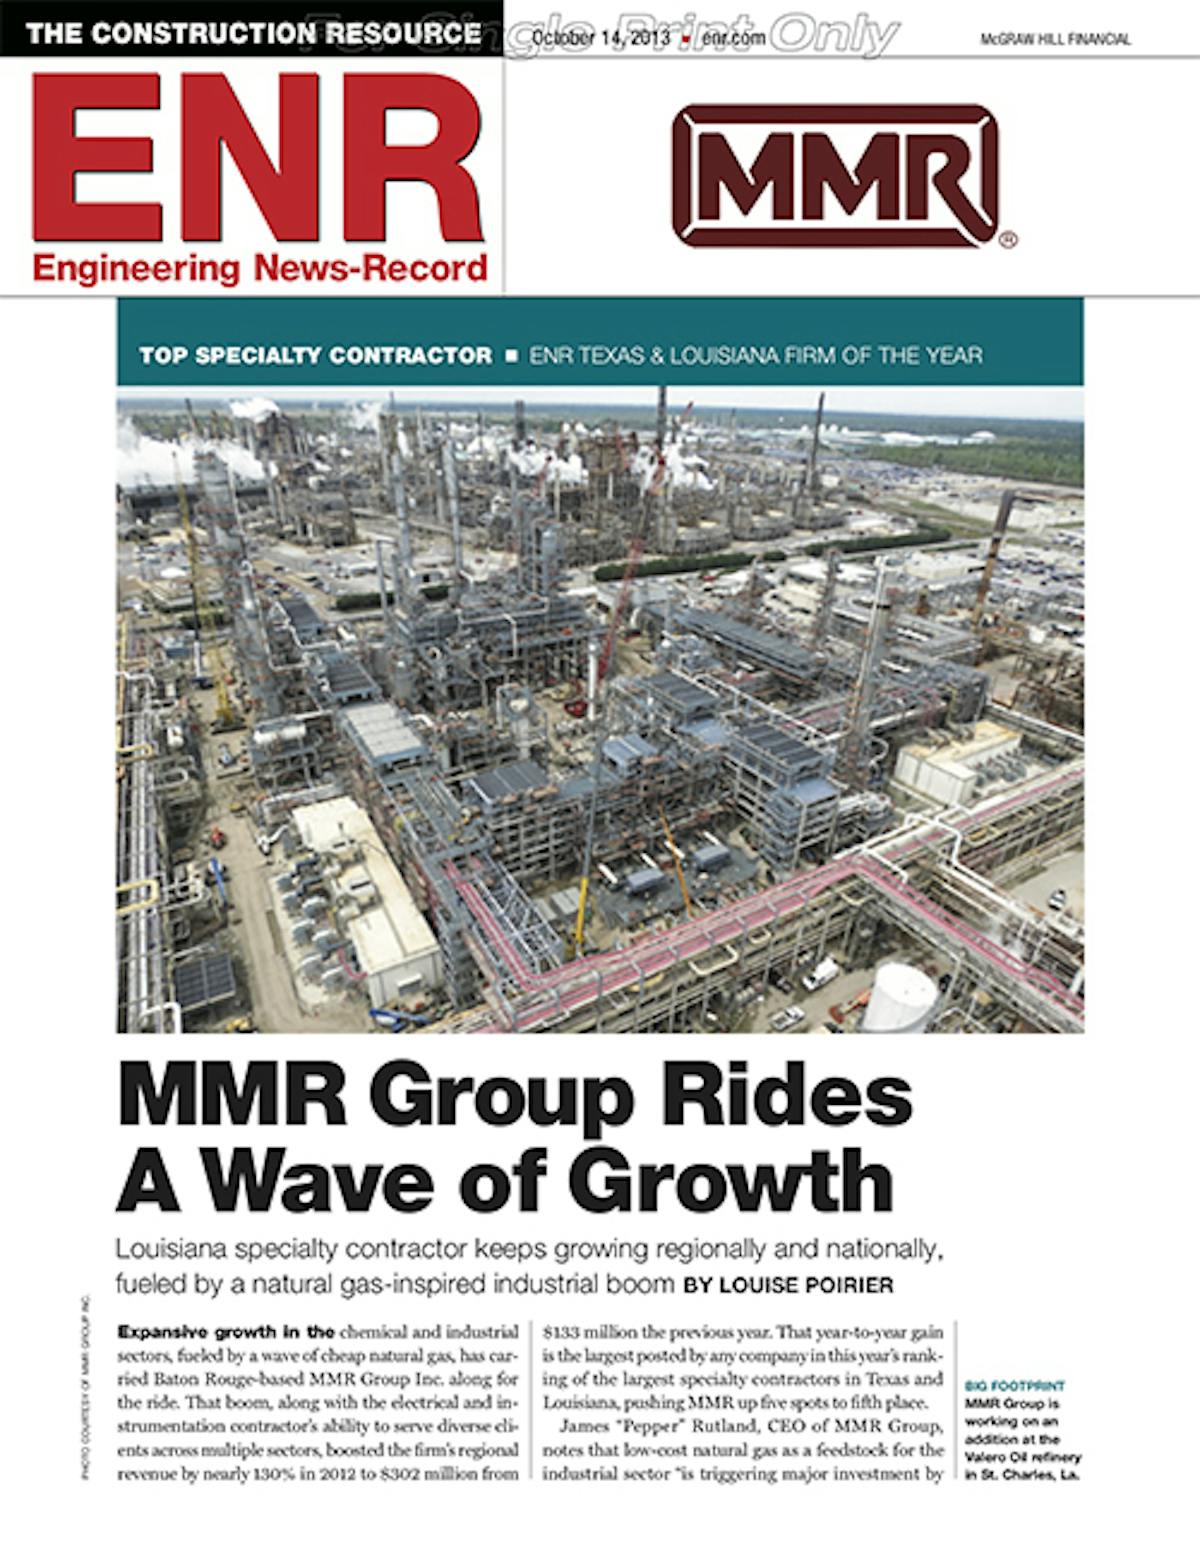 MMR Named Texas/Louisiana ENR's 2013 Specialty Contractor of the Year